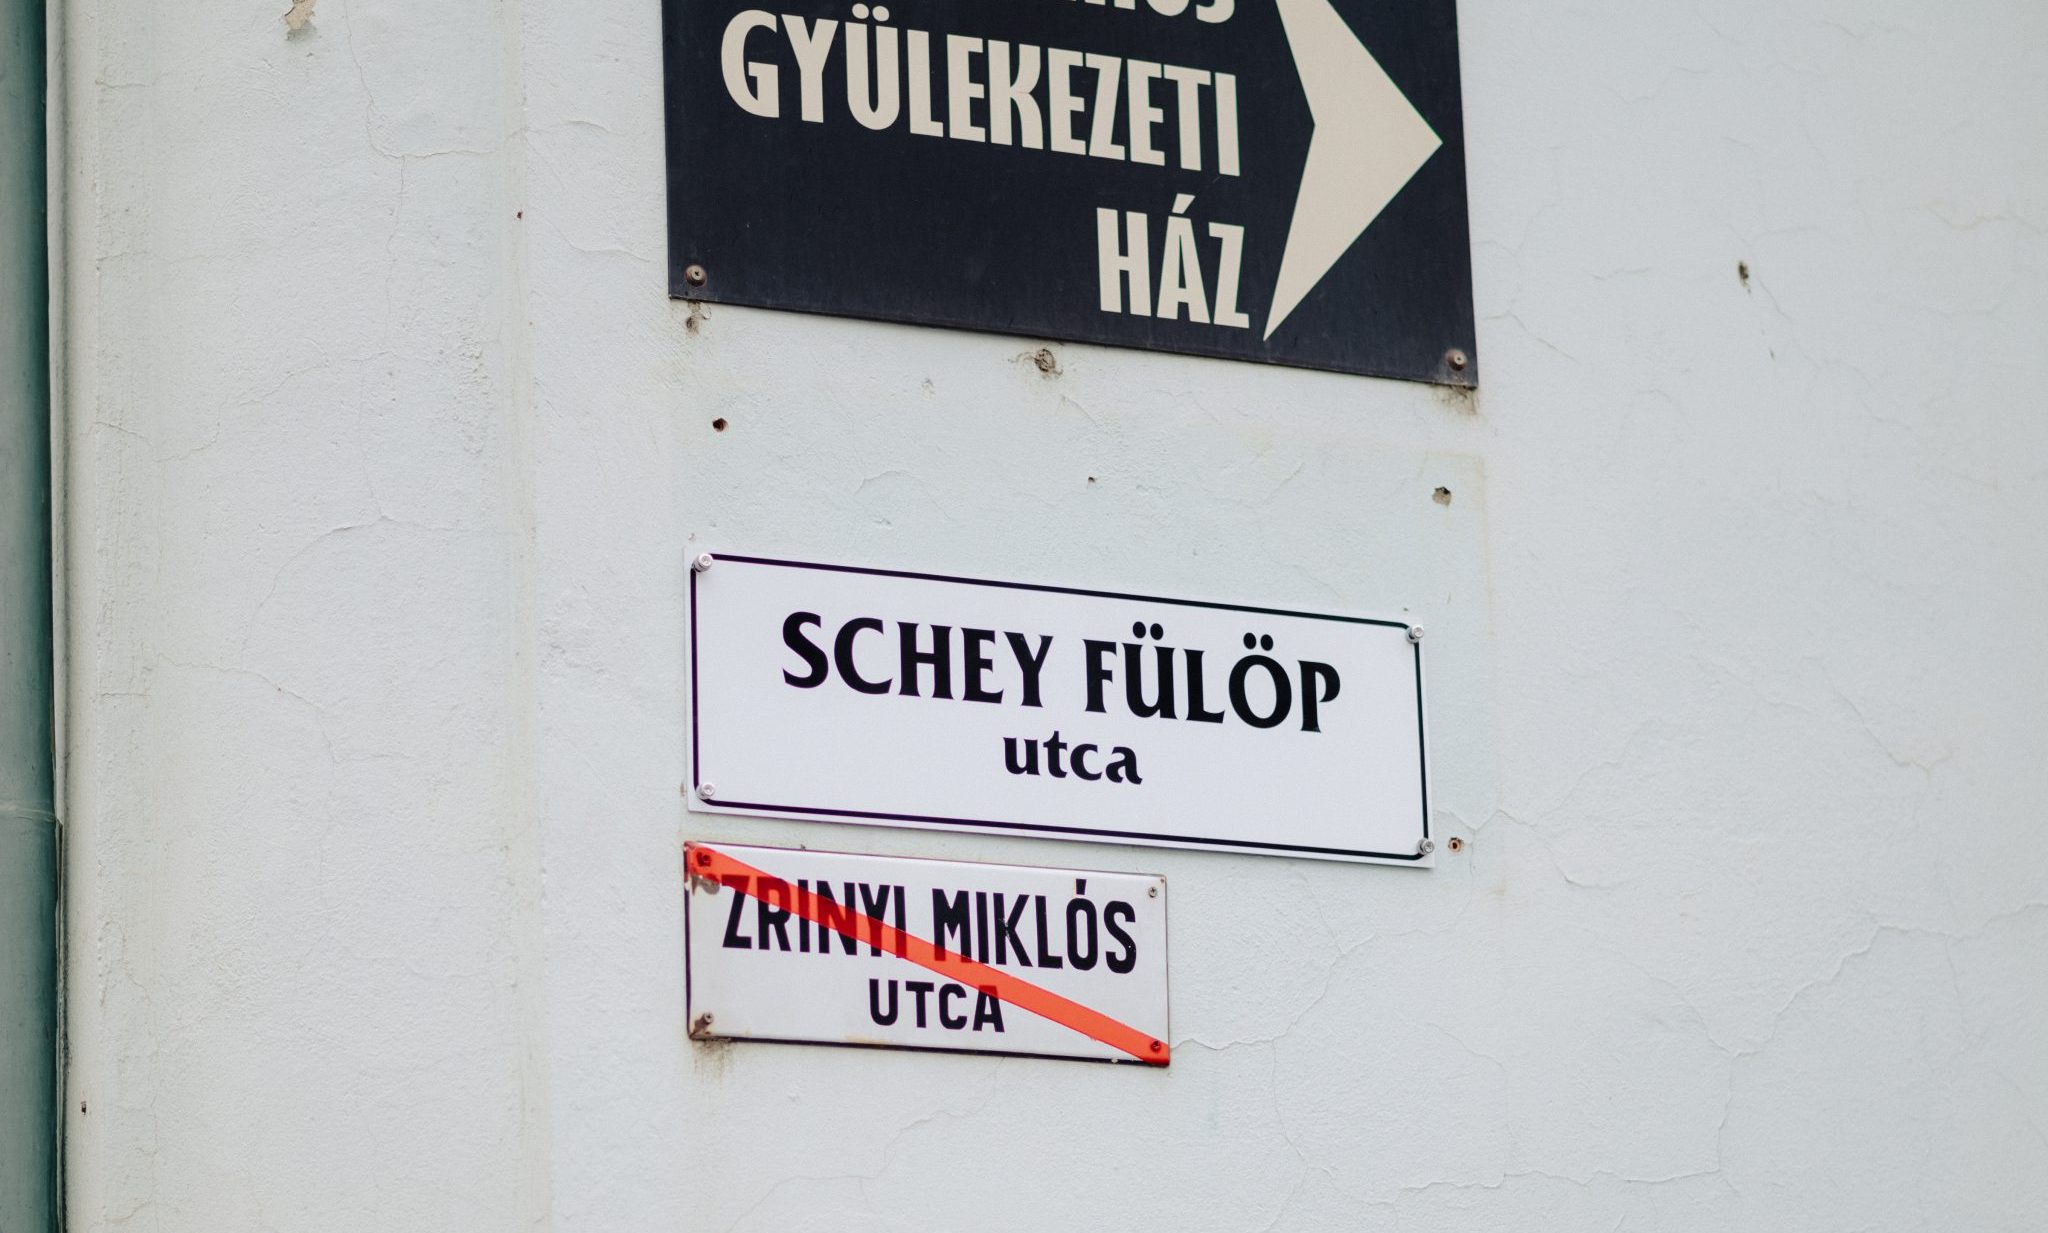 To Honor a Jewish Philanthropist - Street in Kőszeg Gets Back Historic Name